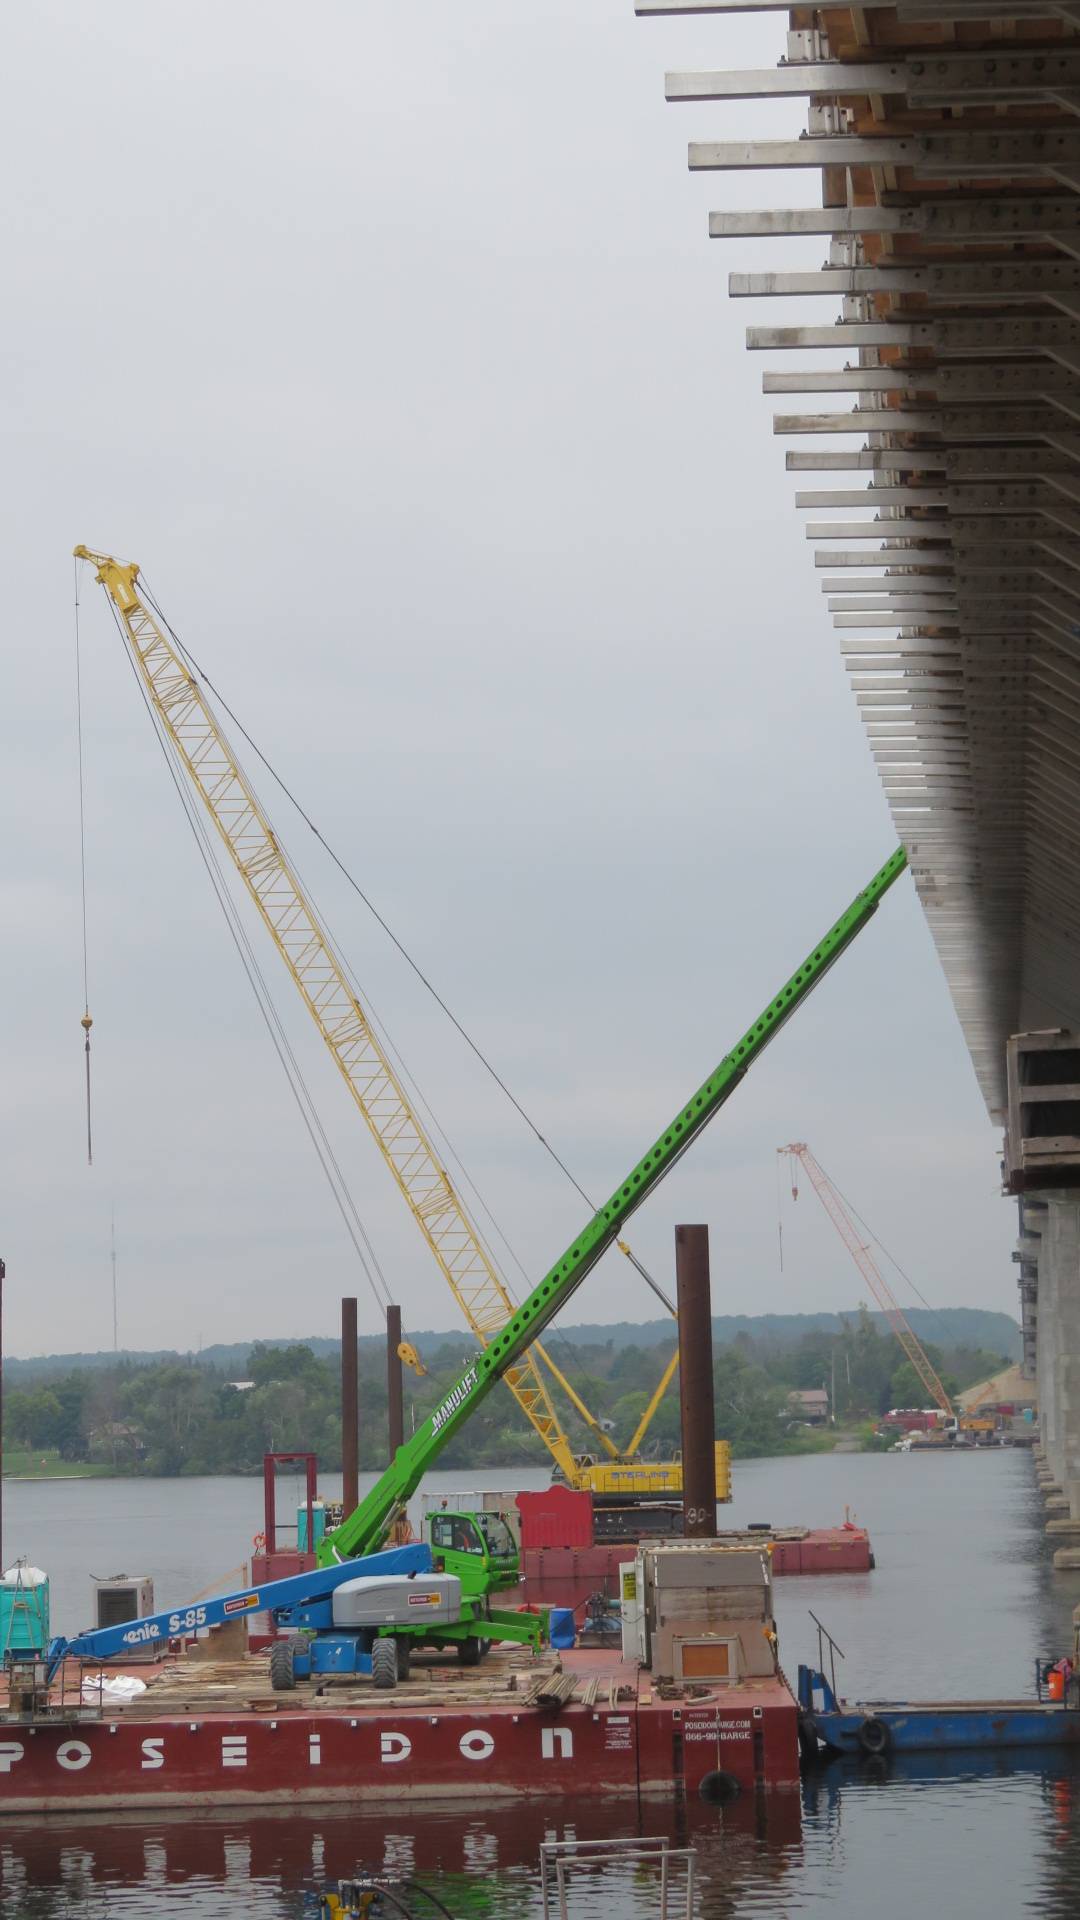 Overview, barge, 200-ton crane, lifts, and work platform